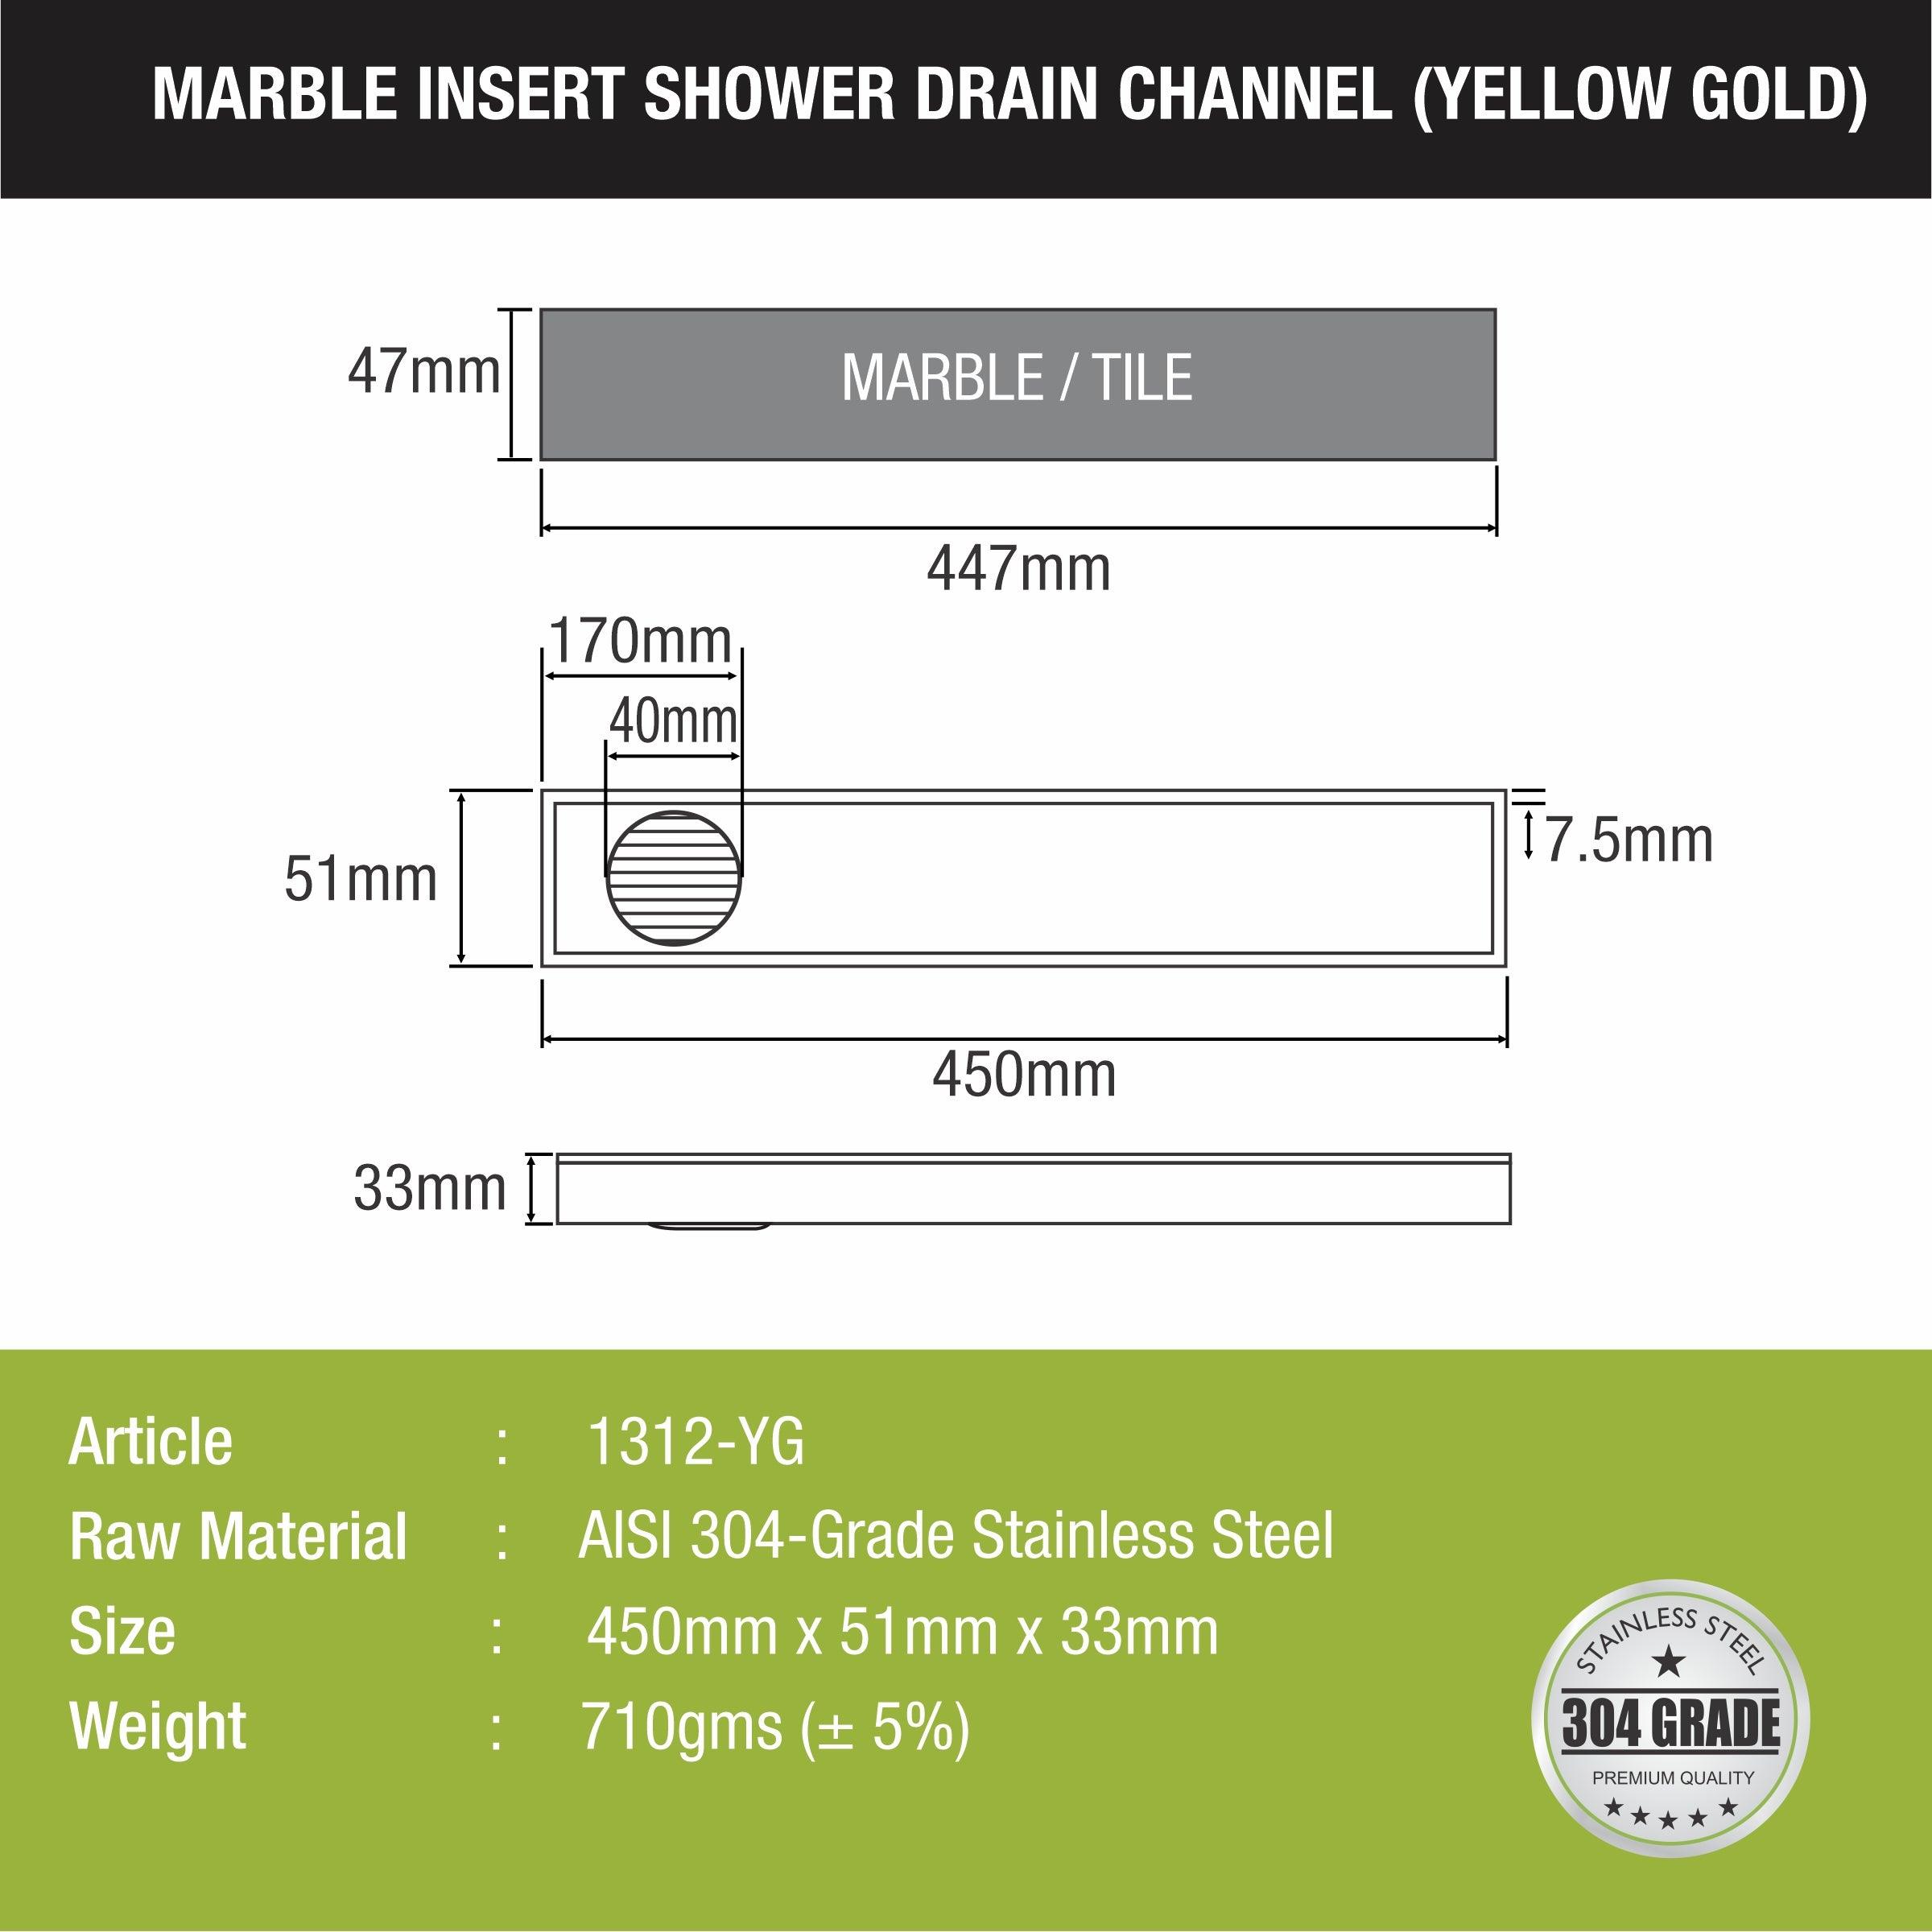 Marble Insert Shower Drain Channel - Yellow Gold (18 x 2 Inches) sizes and dimensions